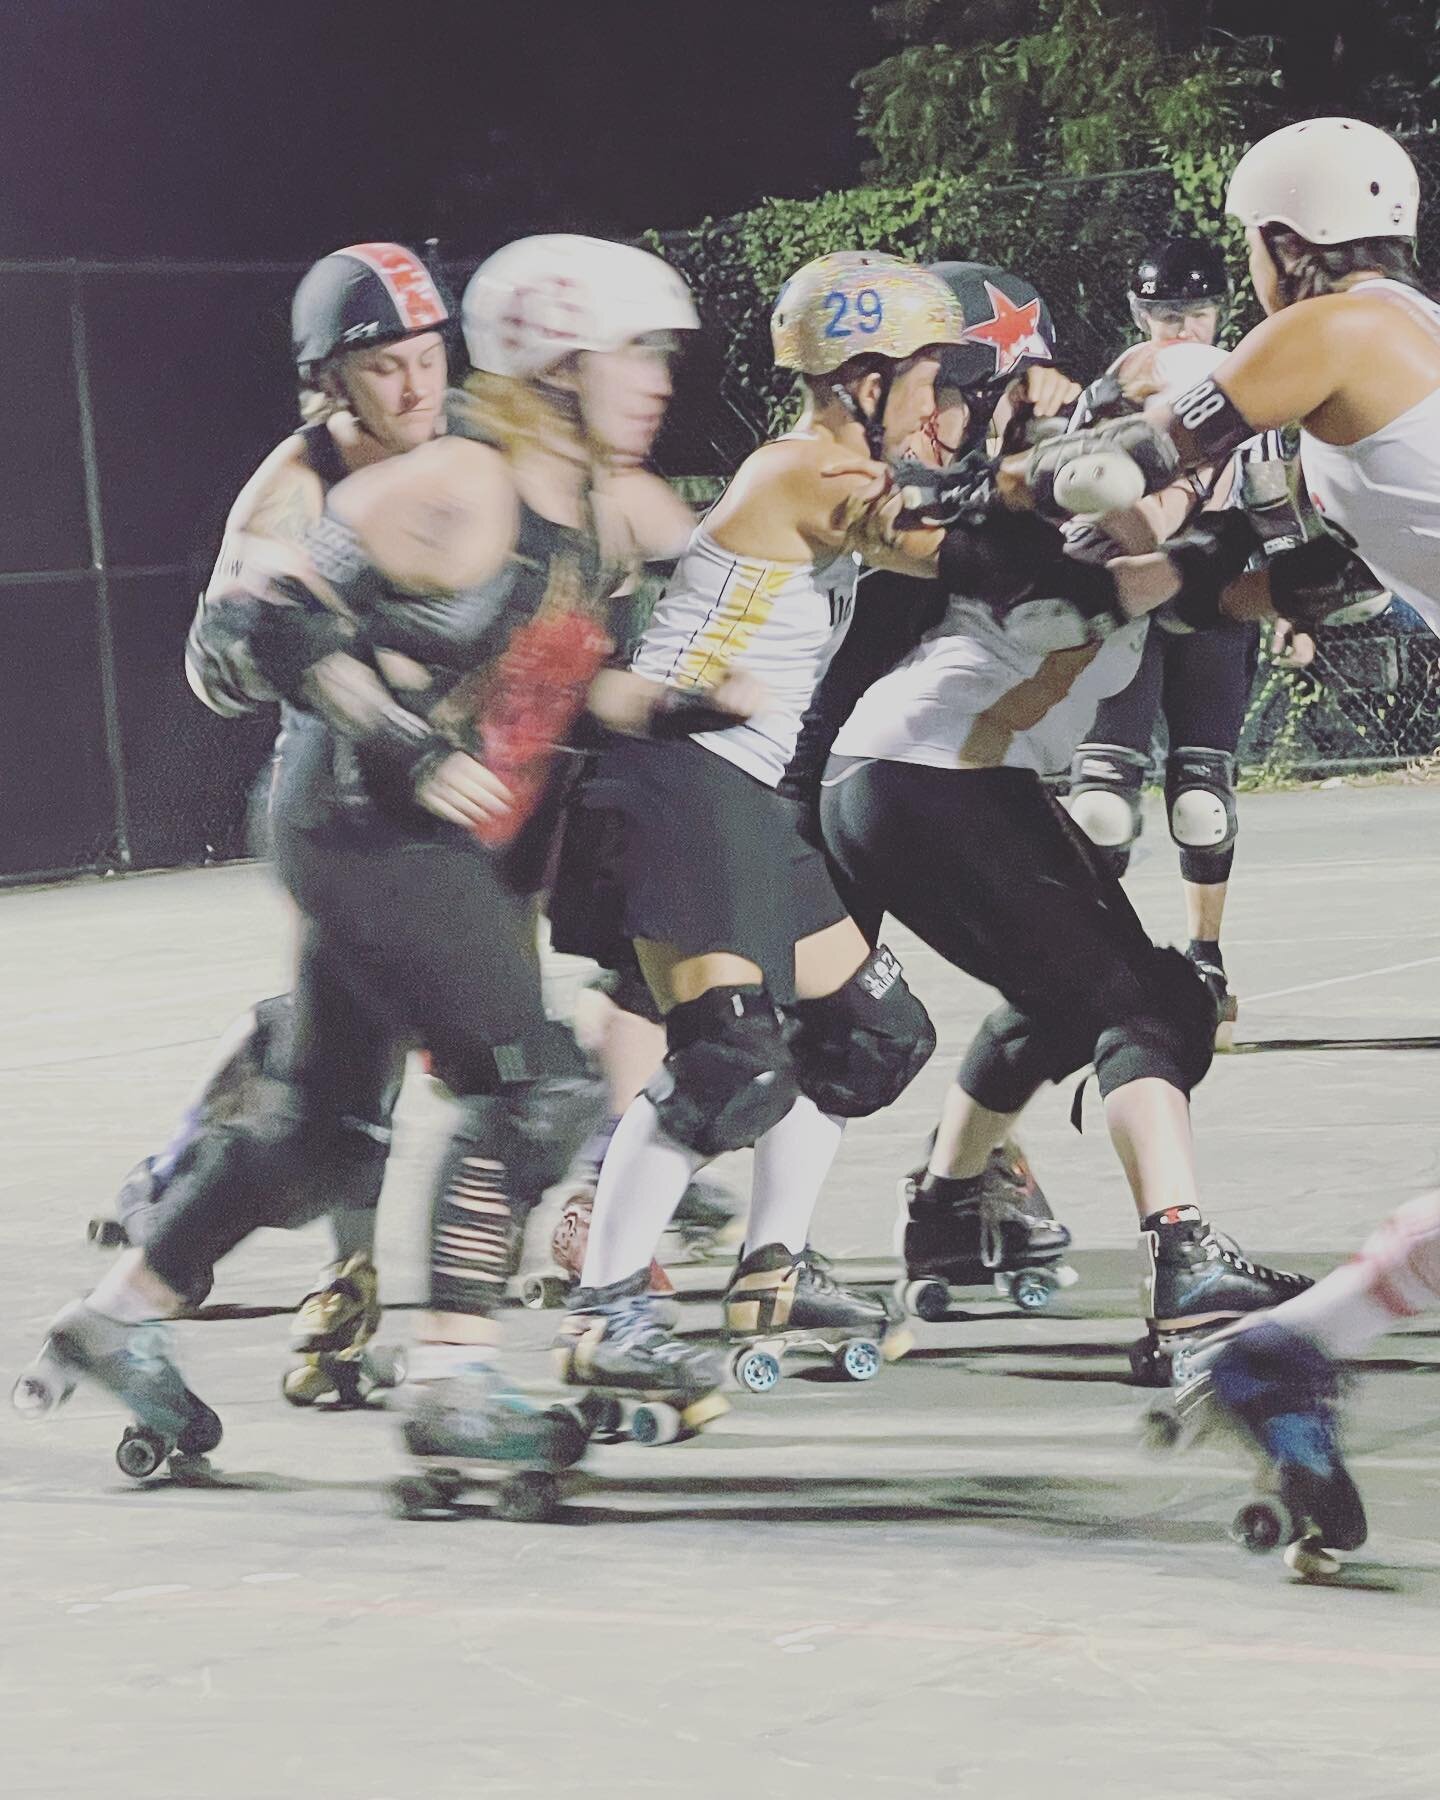 @texasrollergirls FTW! Come out y&rsquo;all! #texasrollergirls #thingstodoinaustintx Proud to be sponsors again this year. #rollerderby is baaaaaack!